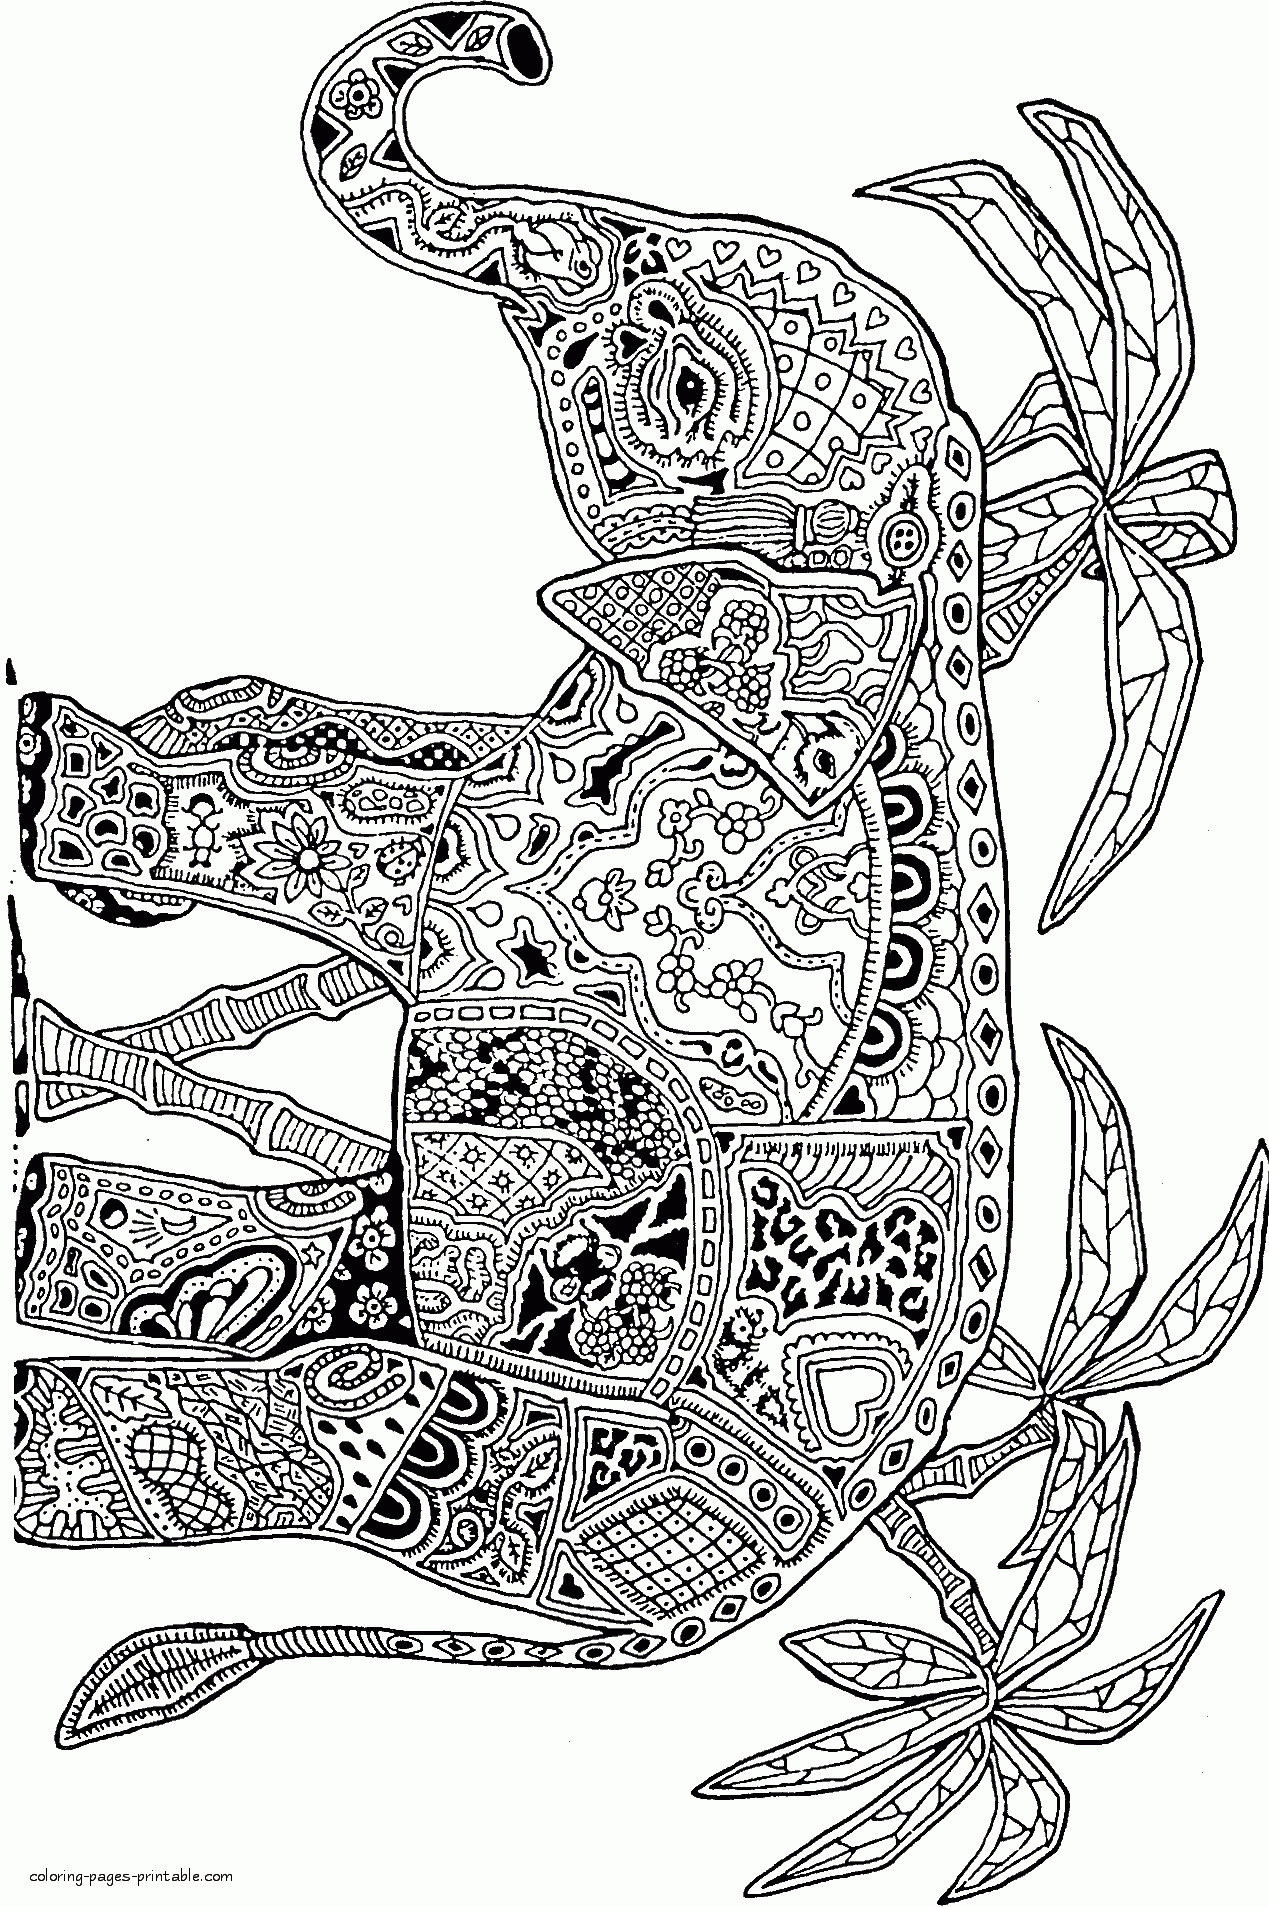 Wild Animal Coloring Pages. Elephant    COLORING PAGES PRINTABLE.COM